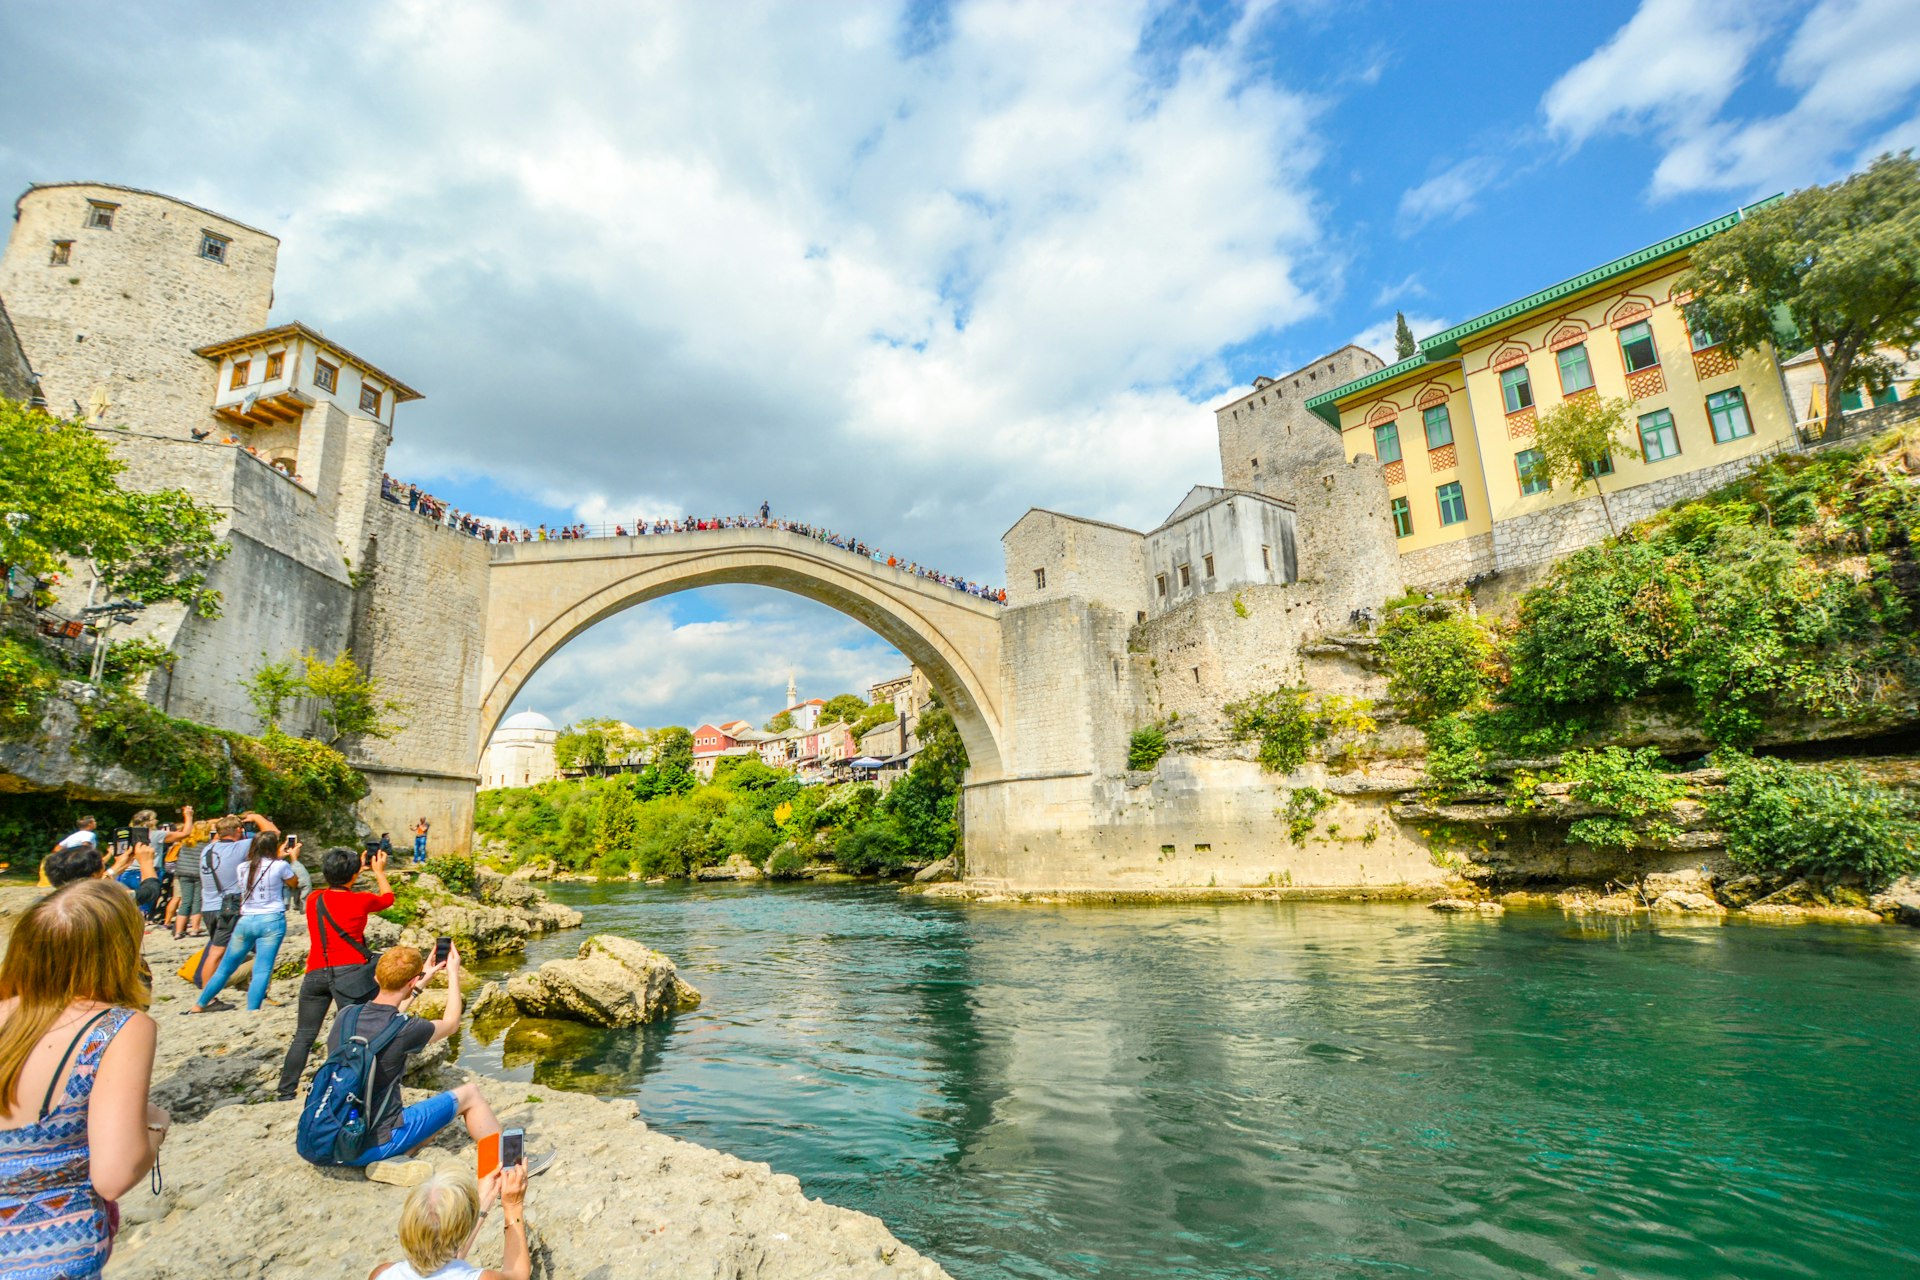 Tourists watch a daredevil diving into the Neretva River in Mostar, Bosnia and Herzegovina